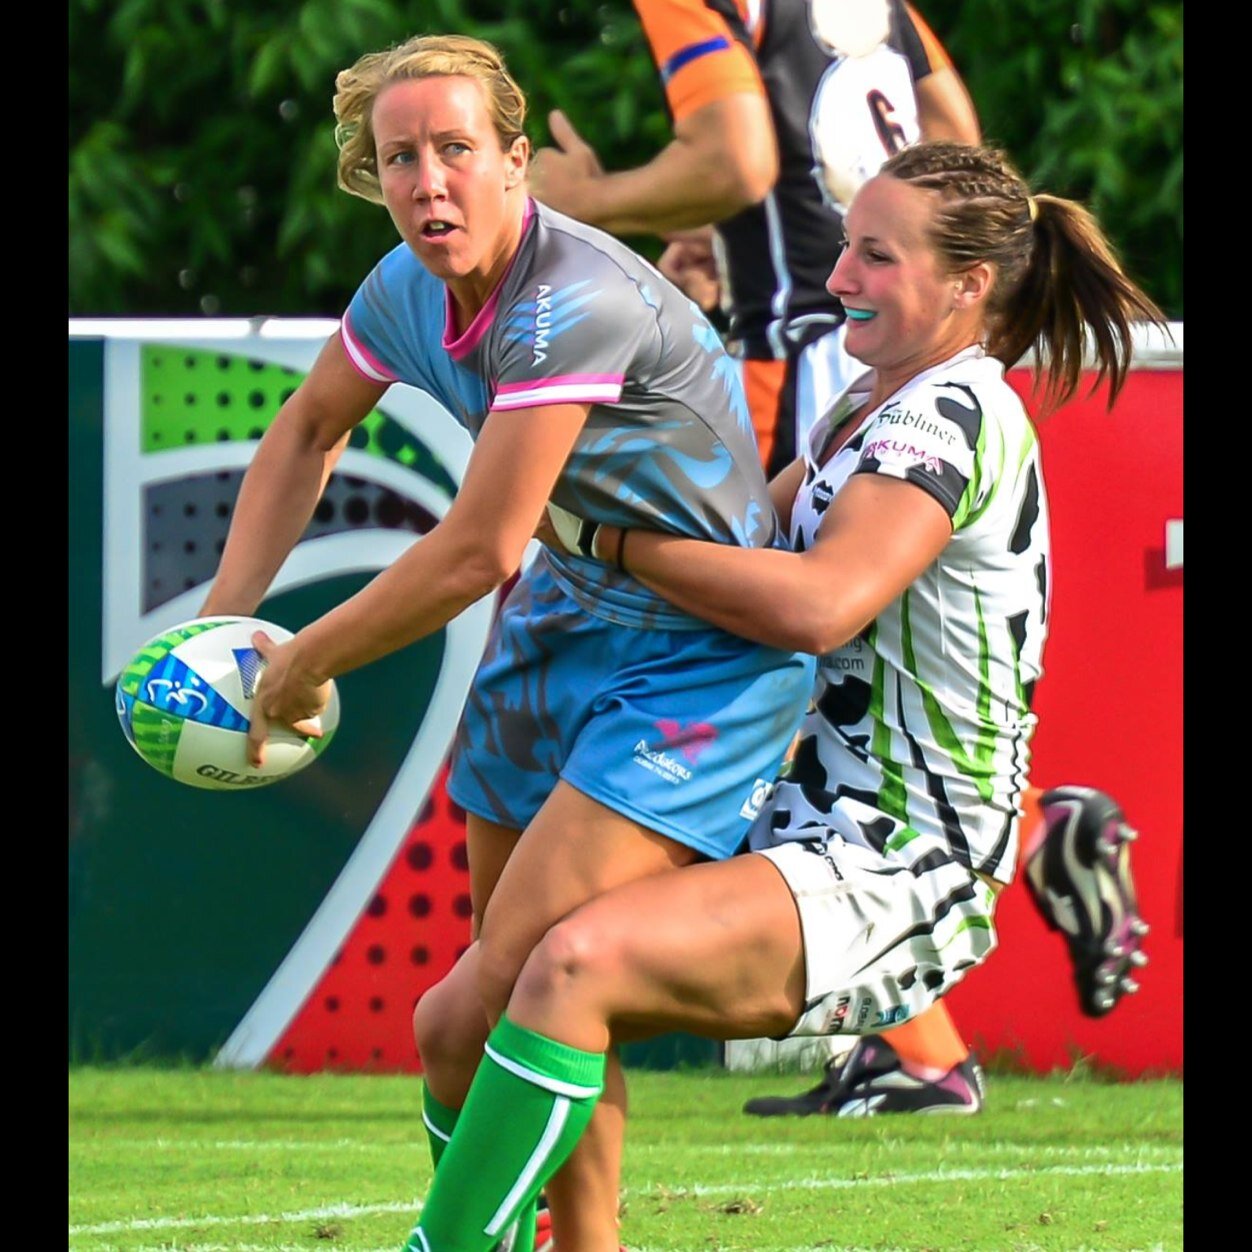 Predators is a women's rugby 7s team made up of players of former and current regional/international players from around the world.